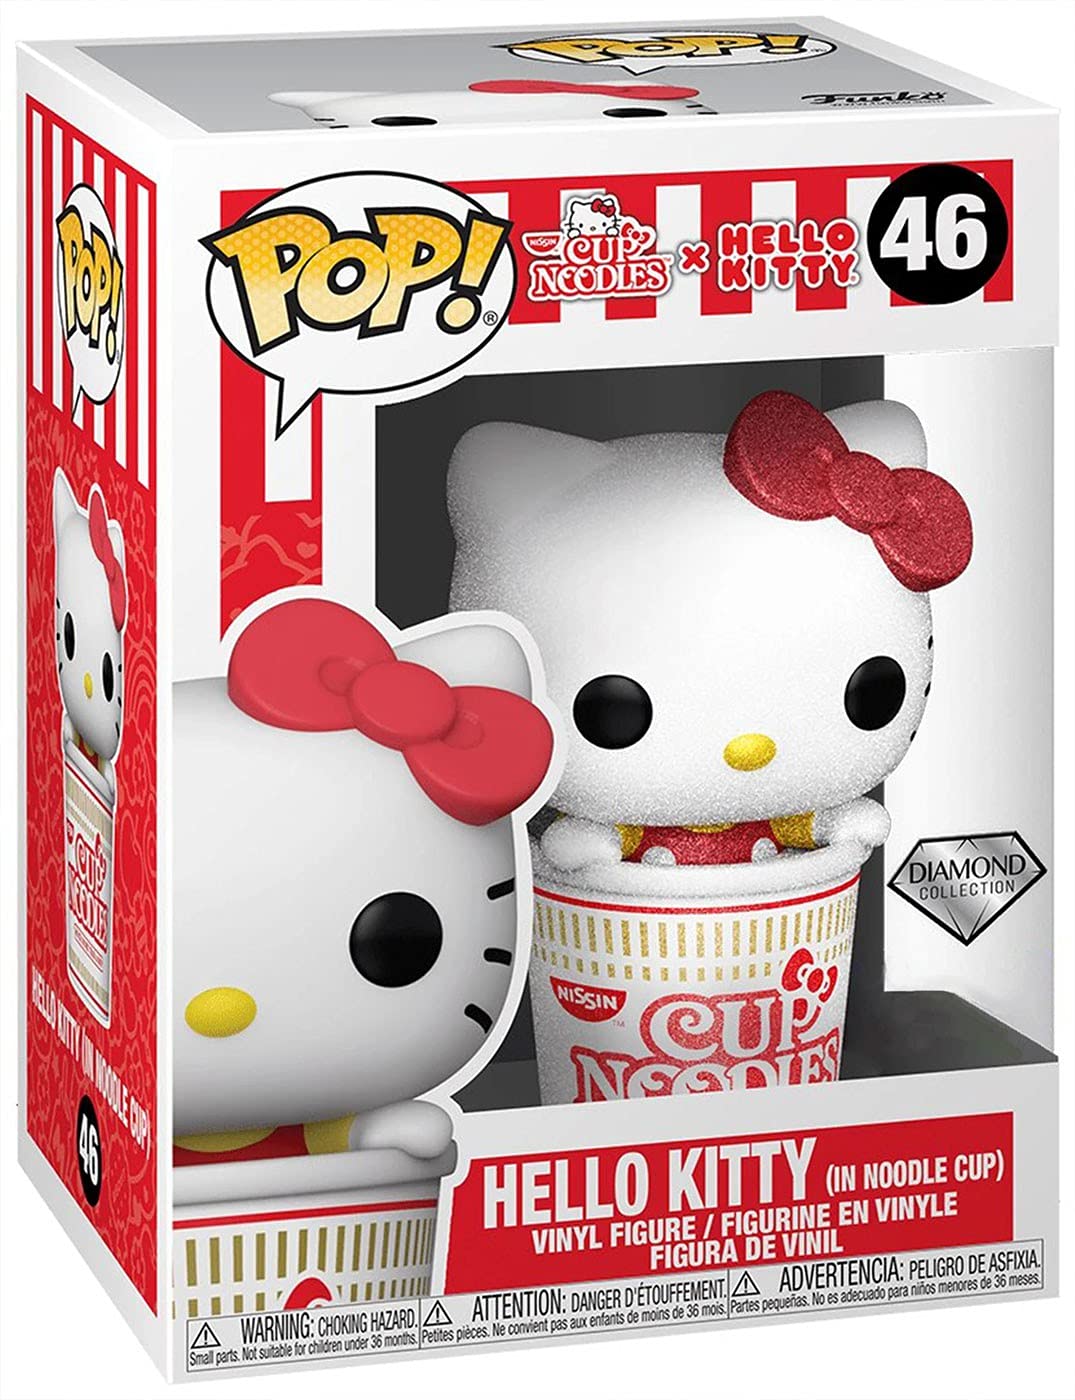 Funko POP! Sanrio Cup Noodles x Hello Kitty - Hello Kitty (In Noodle Cup) #46 [Diamond Collection] Exclusive